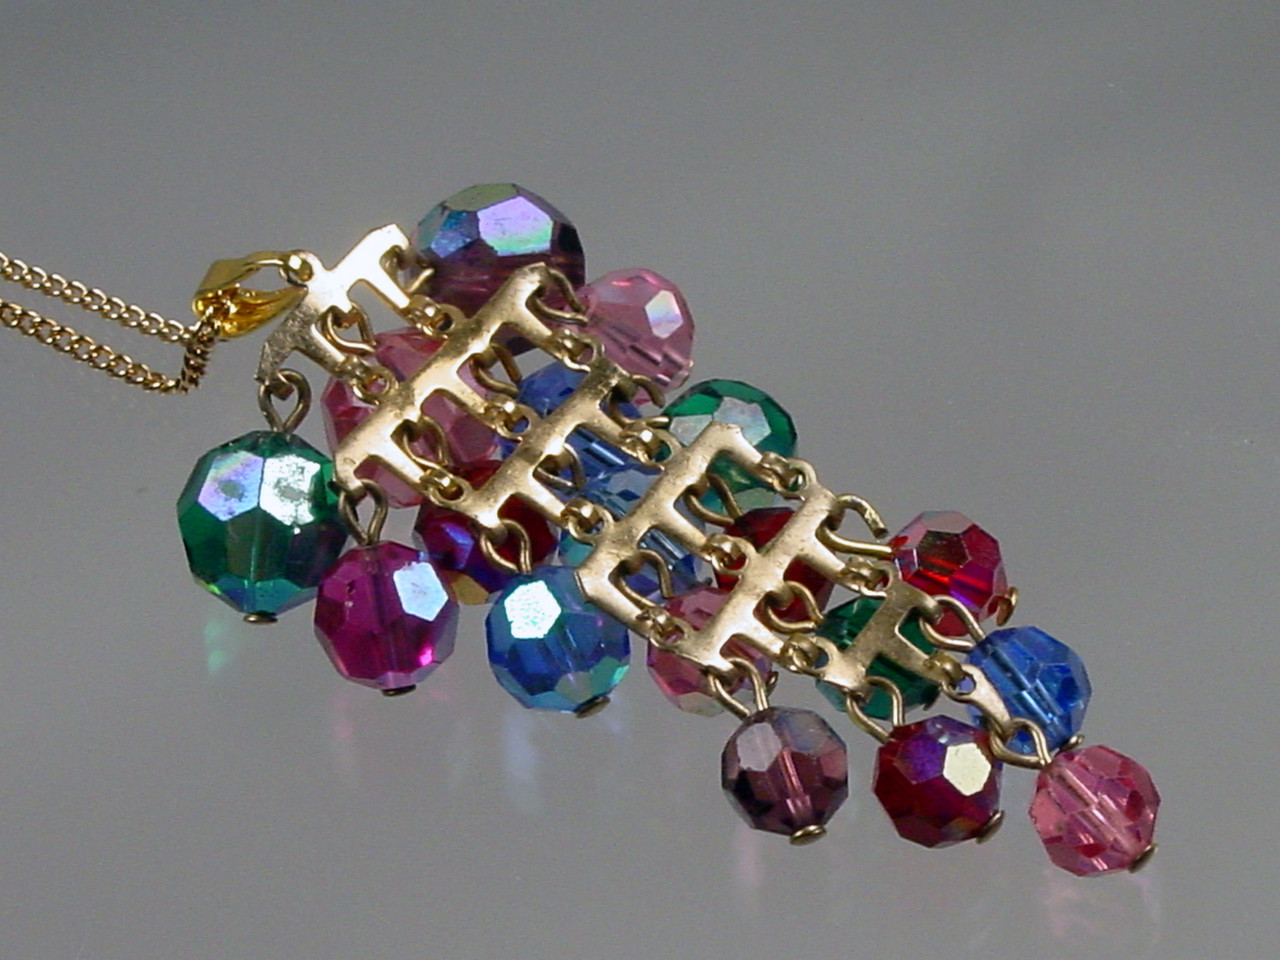 Tiered segmented pendant with 18 crystals